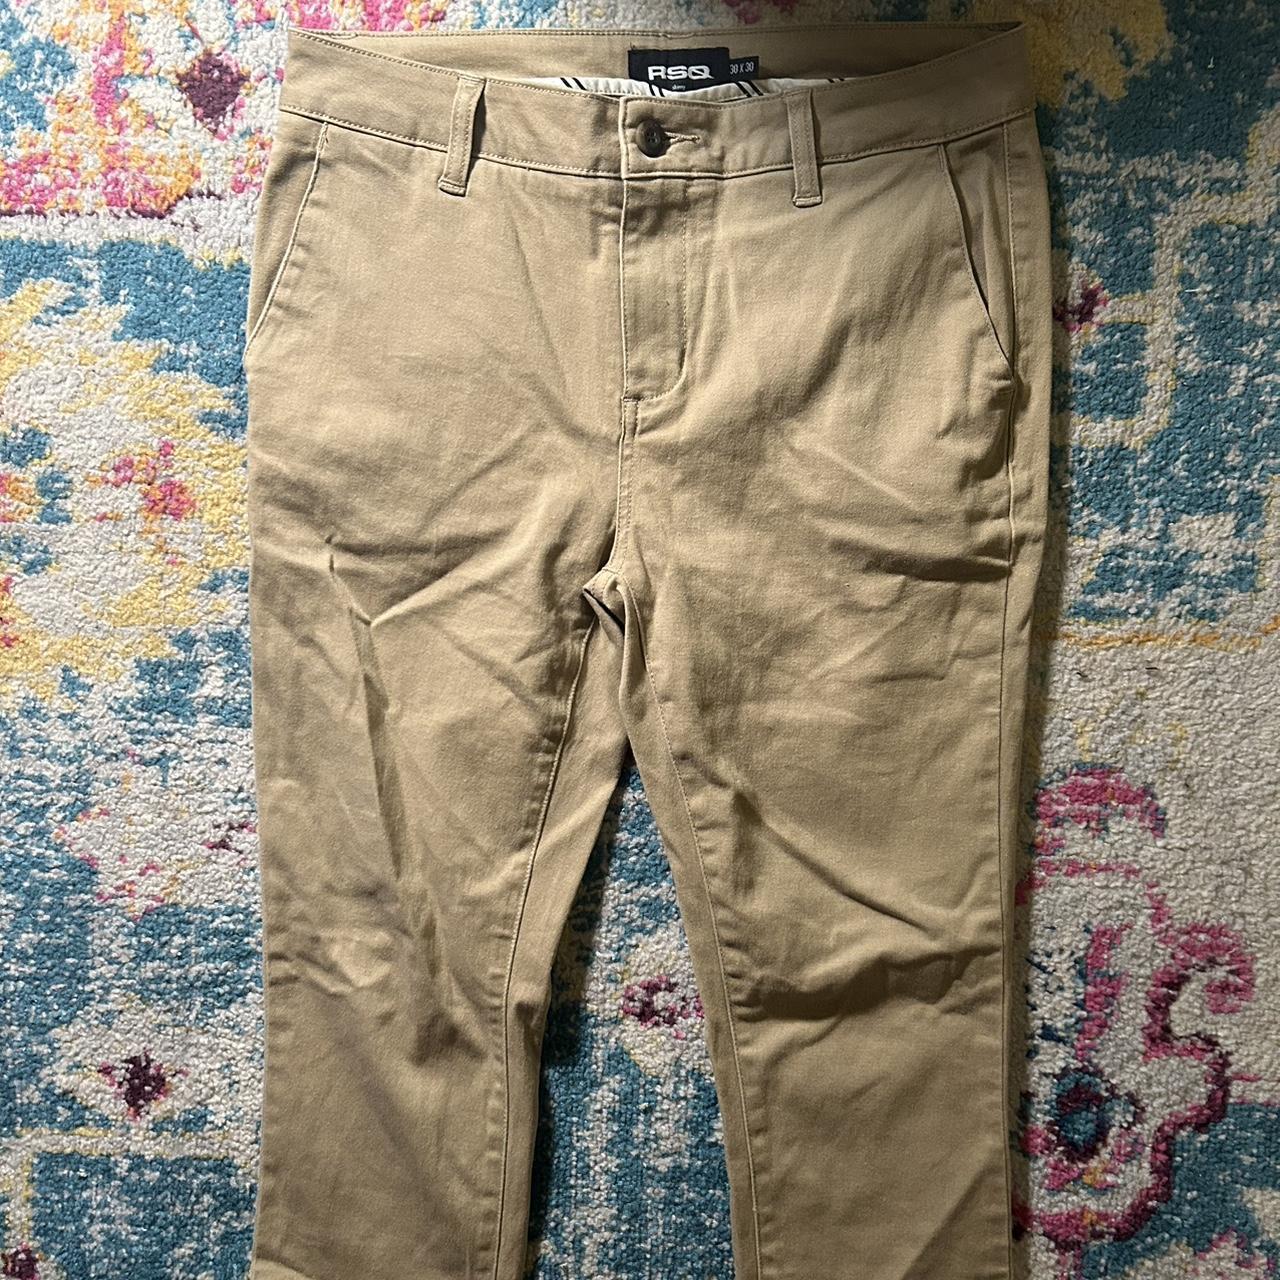 RSQ pants from Tilly's, they're 31x30, worn often, - Depop